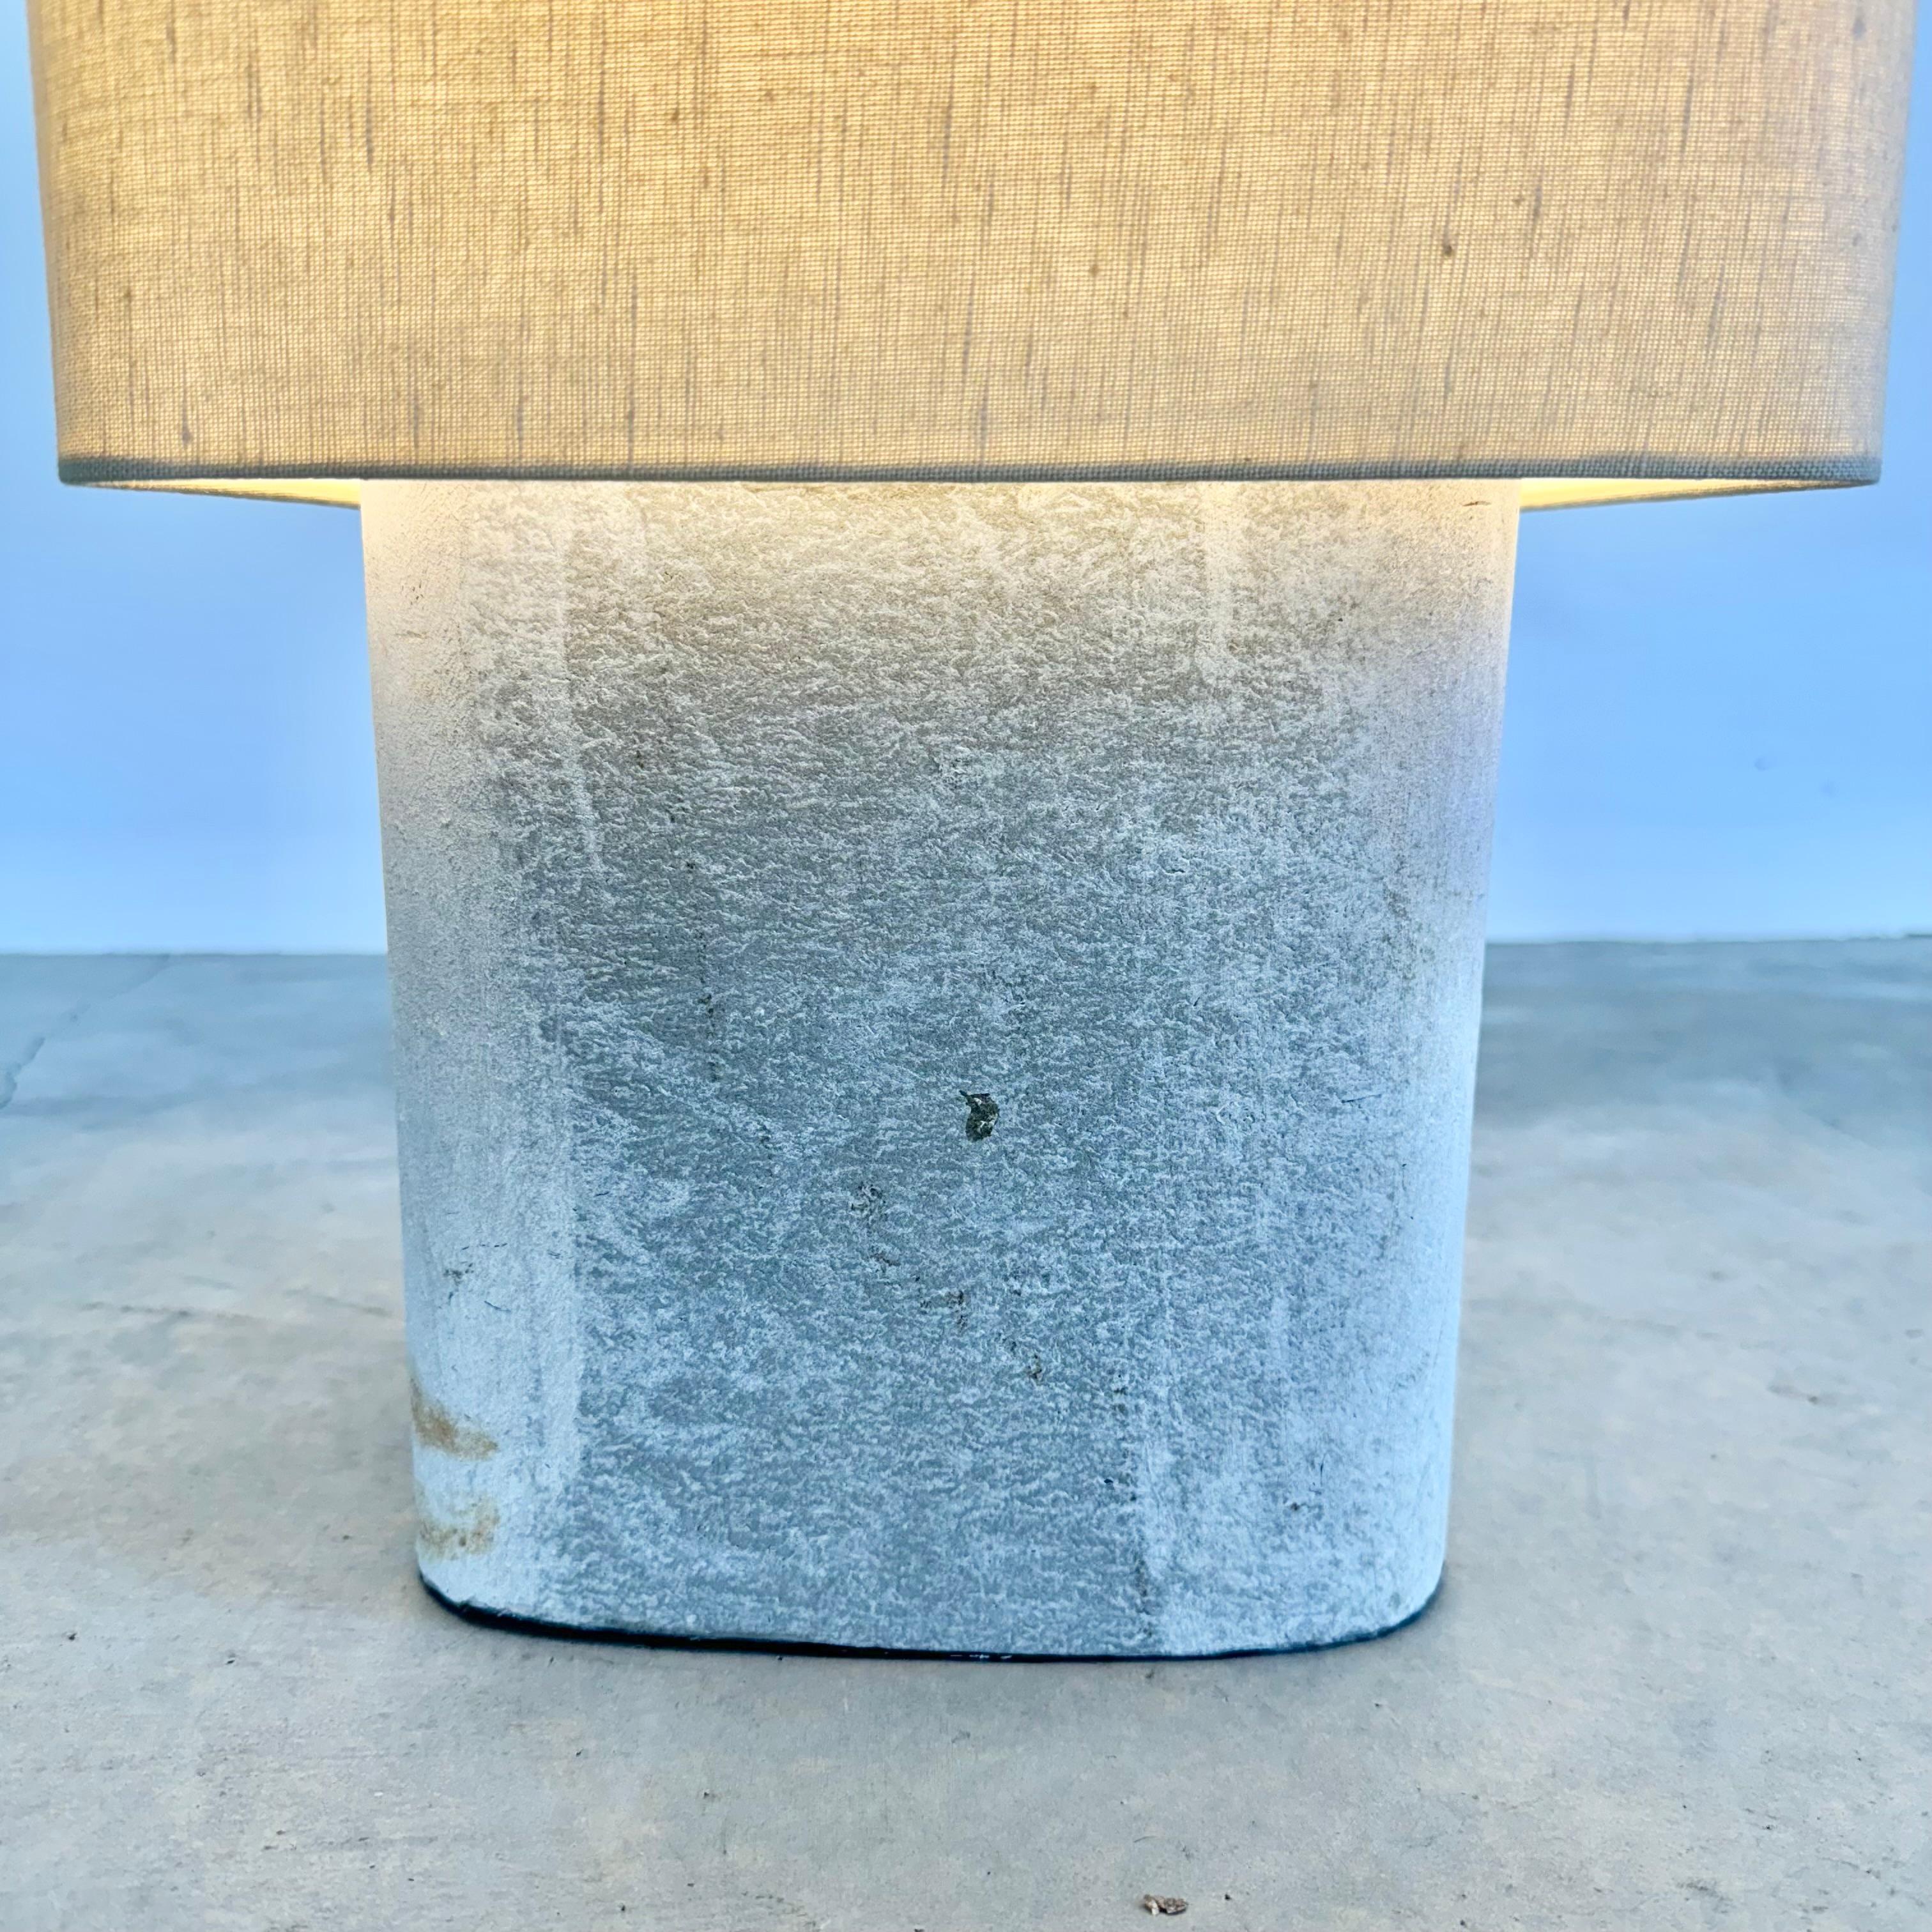 Willy Guhl Concrete Table Lamp, 1960s Switzerland For Sale 2